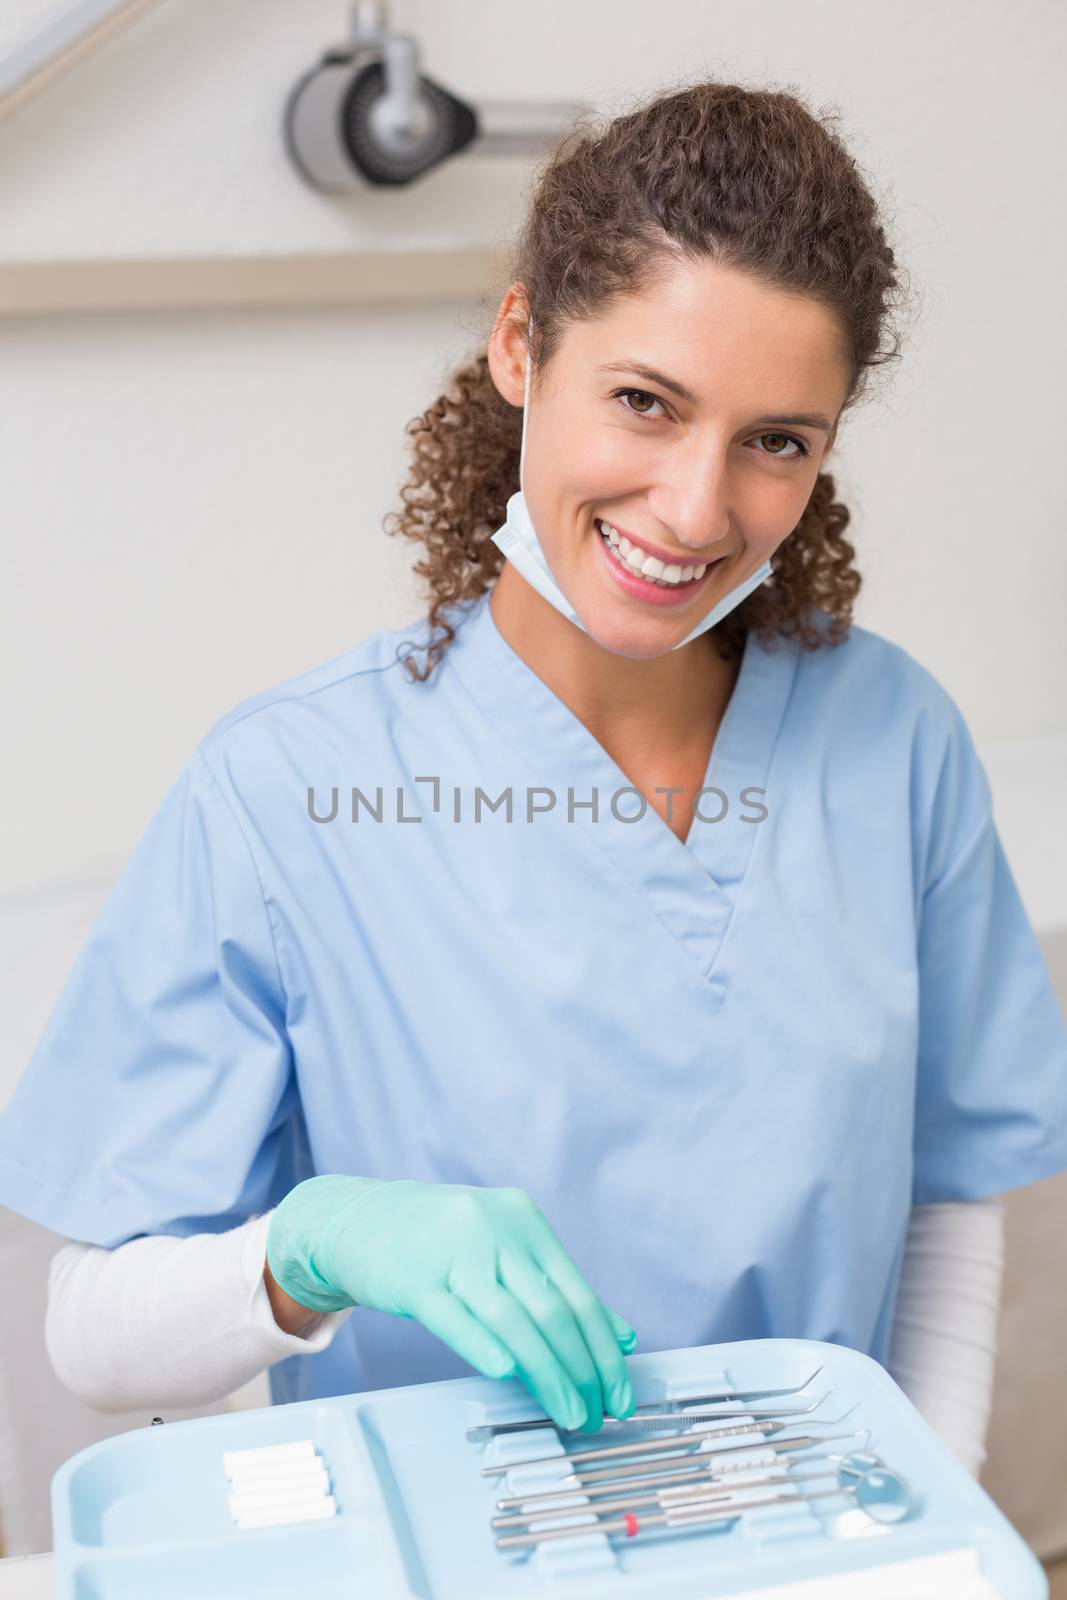 Dentist smiling at camera while picking up tools by Wavebreakmedia